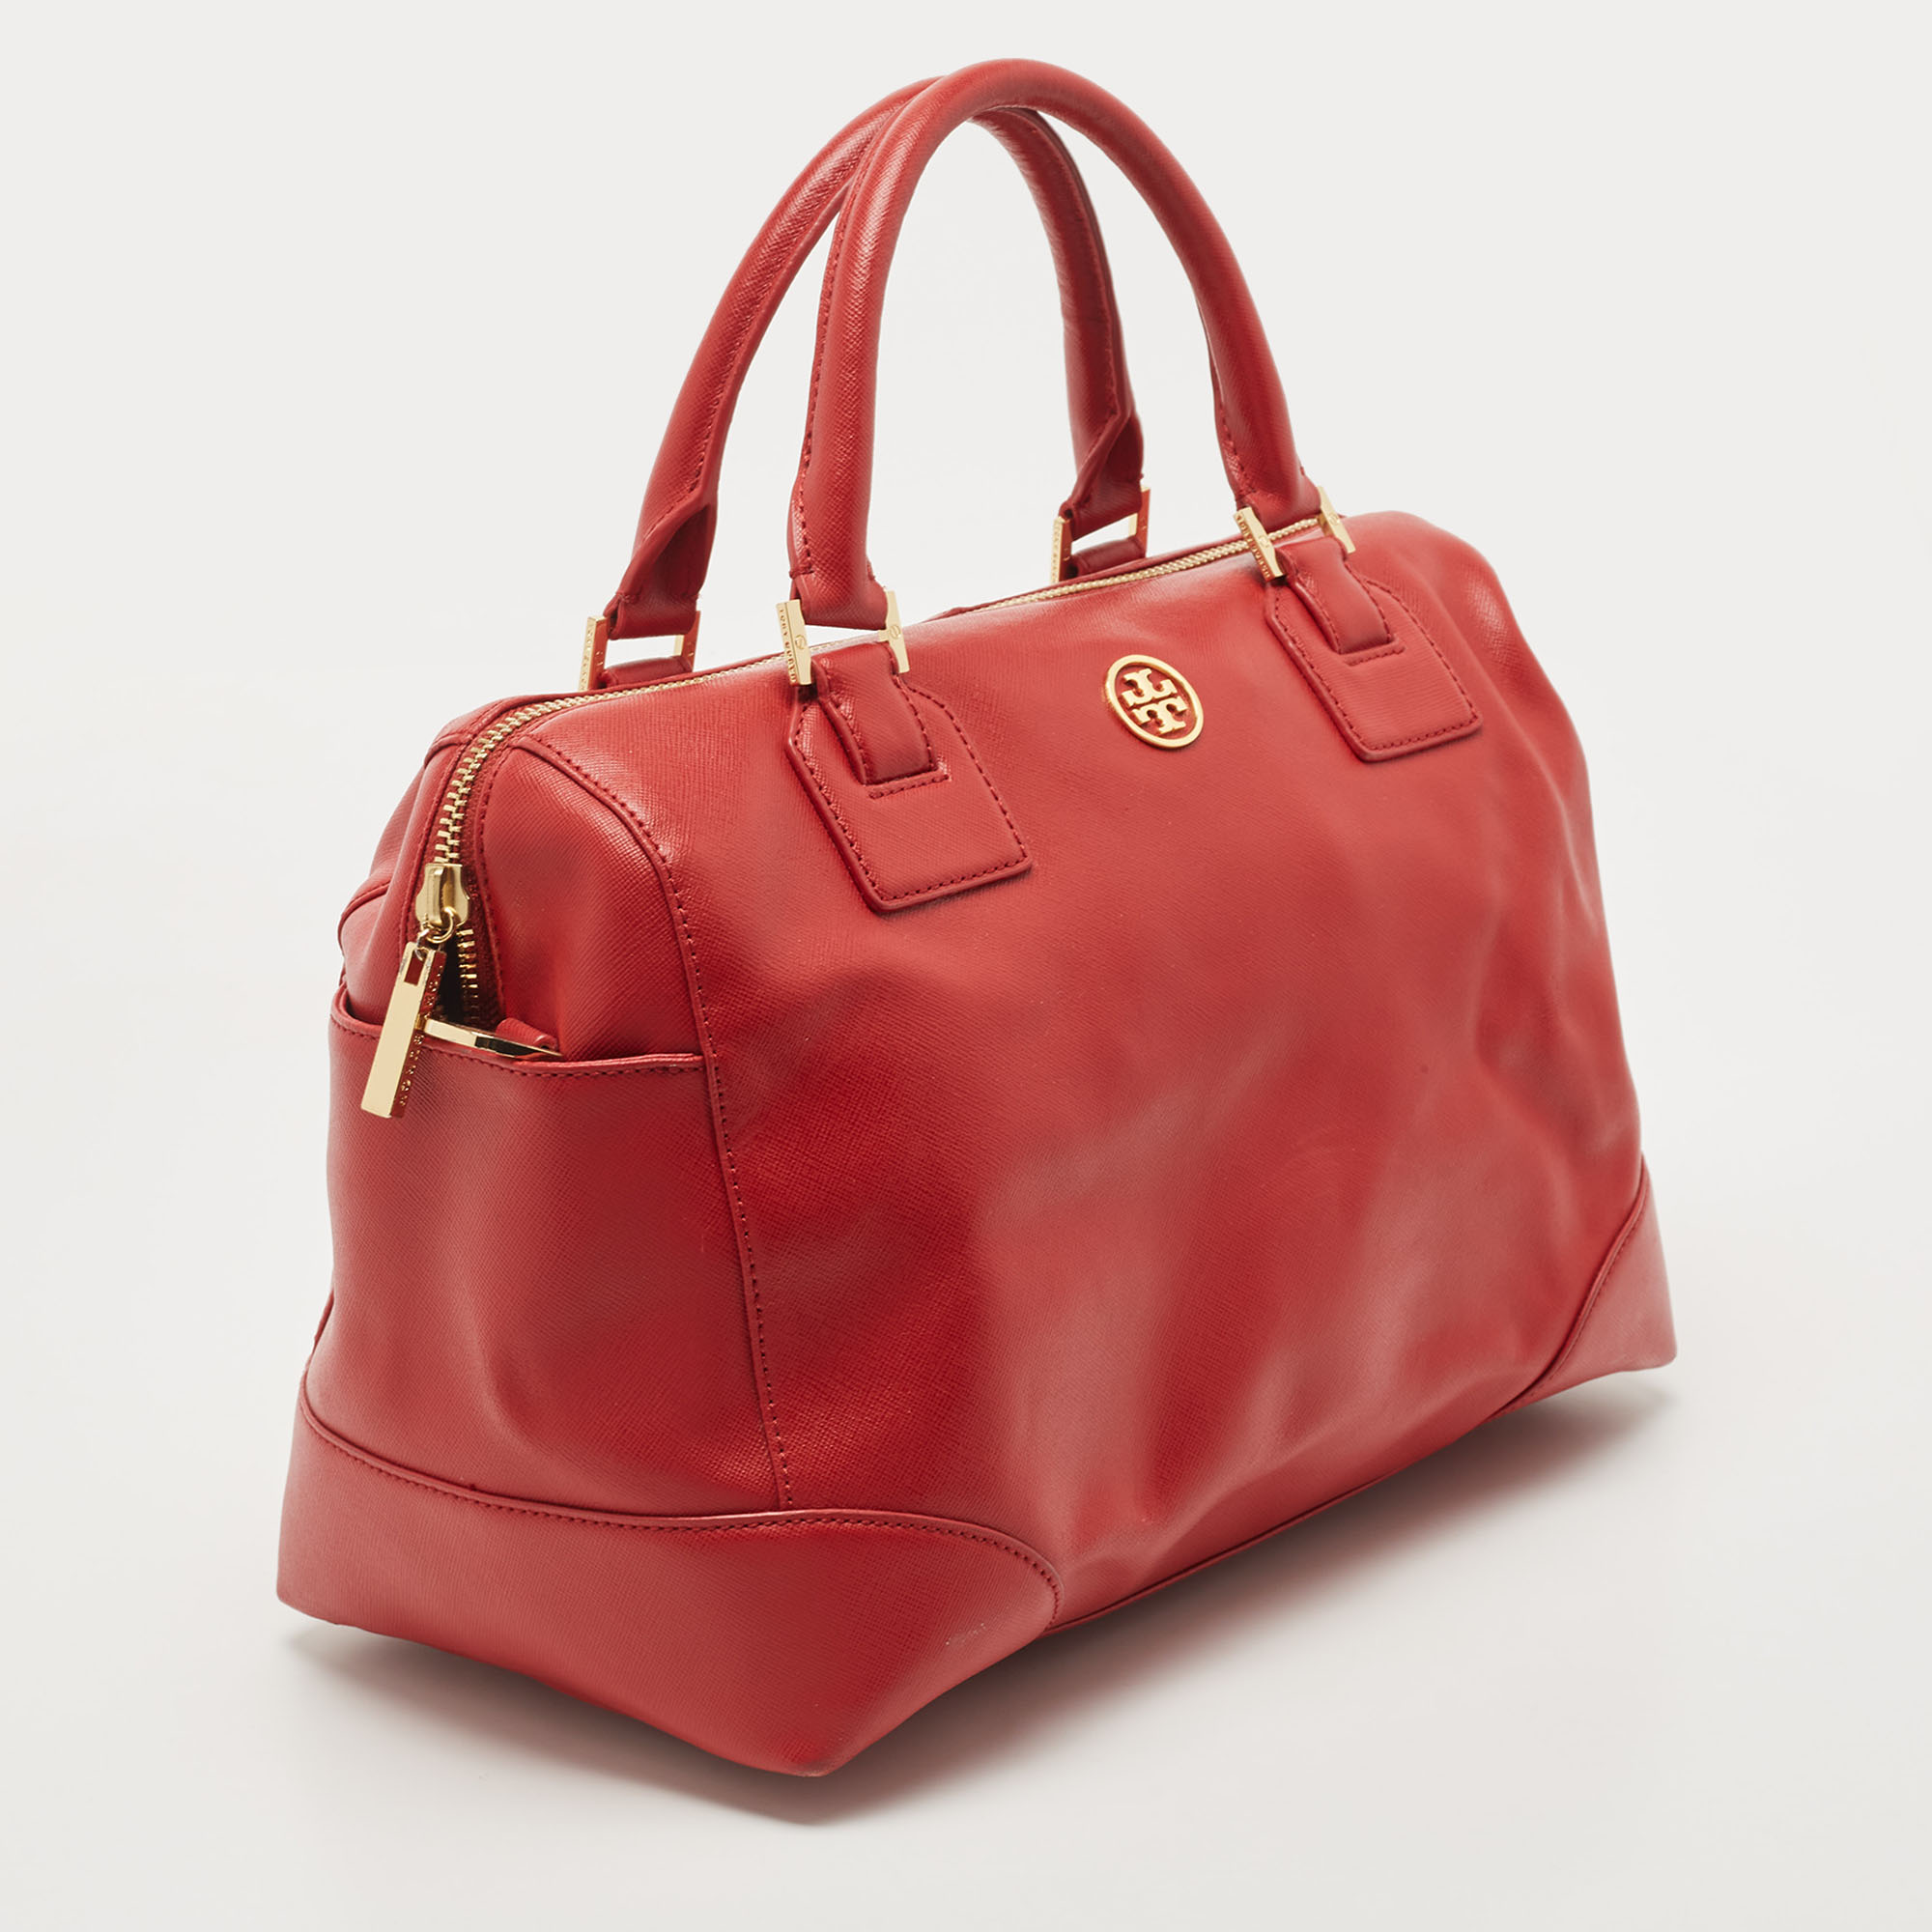 Tory Burch Red Leather Robinson Middy Satchel